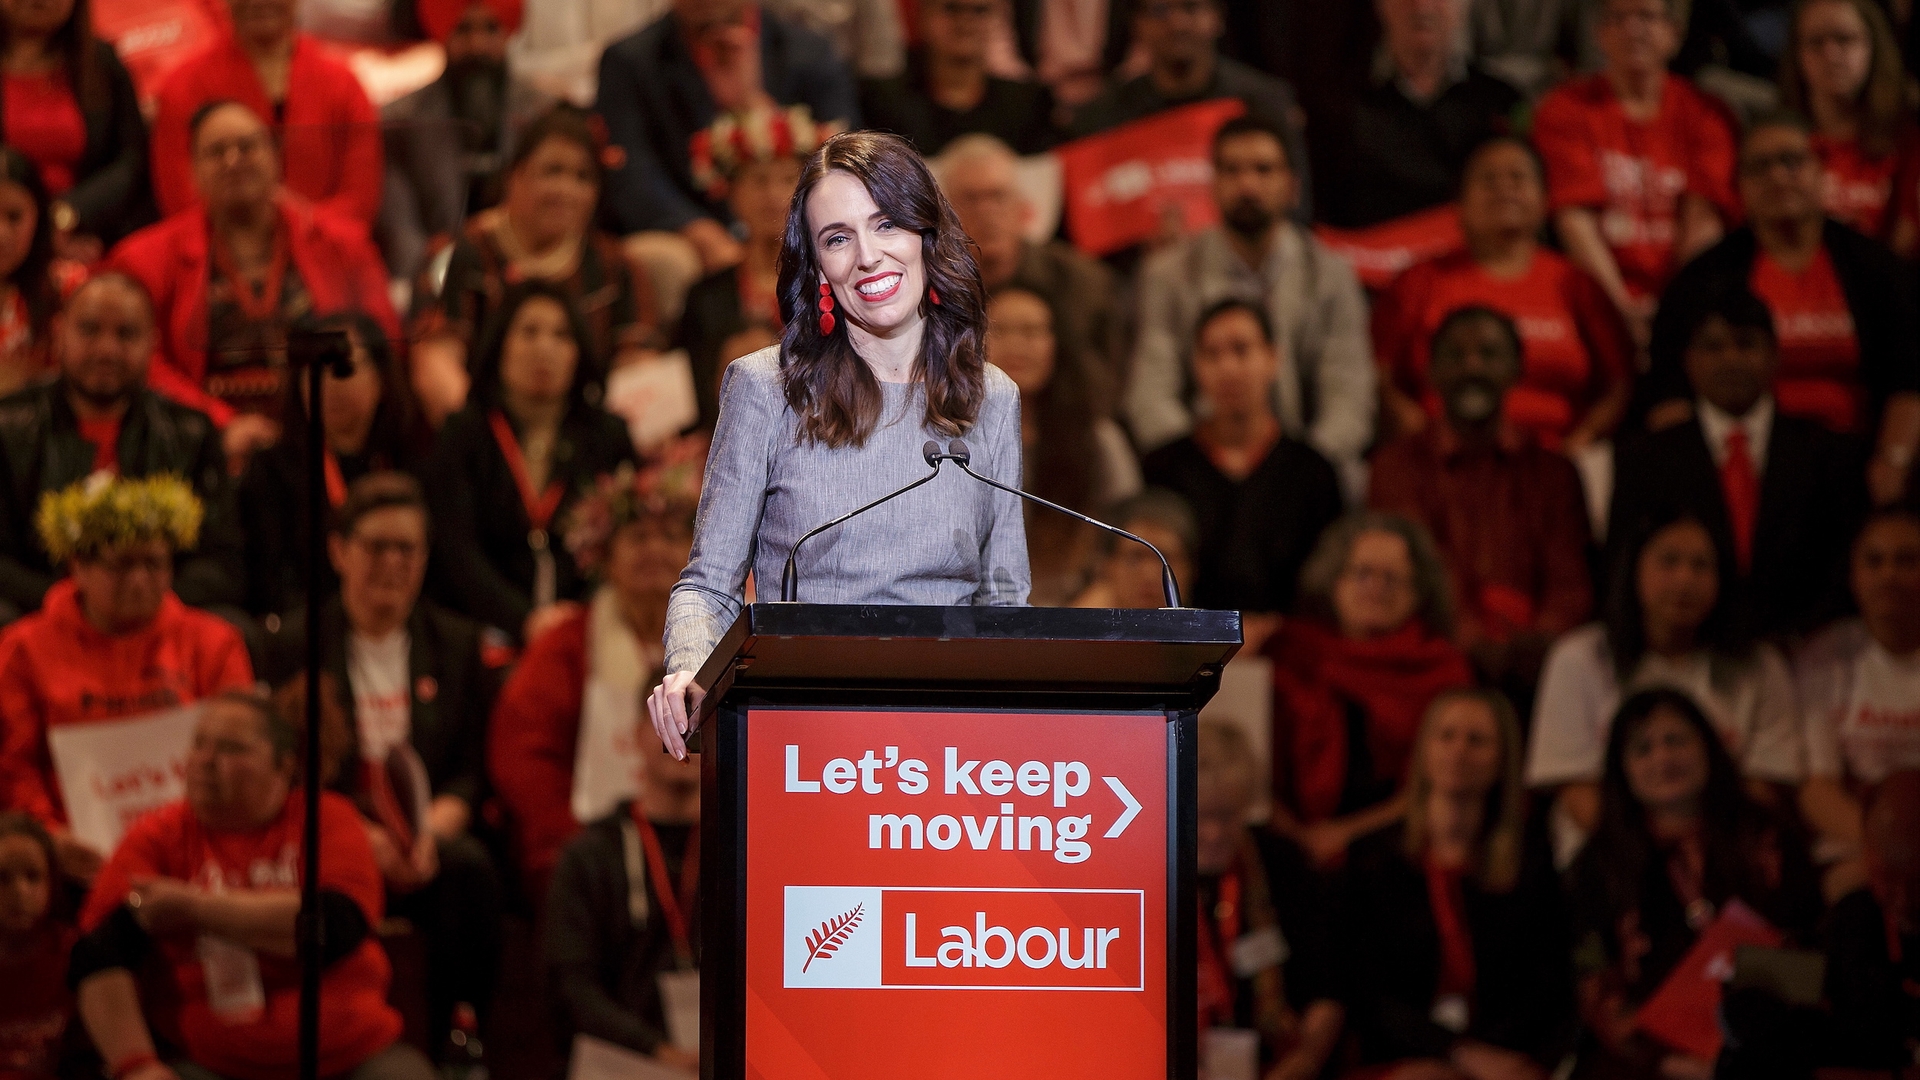 Labour Party campaign launch ahead of elections